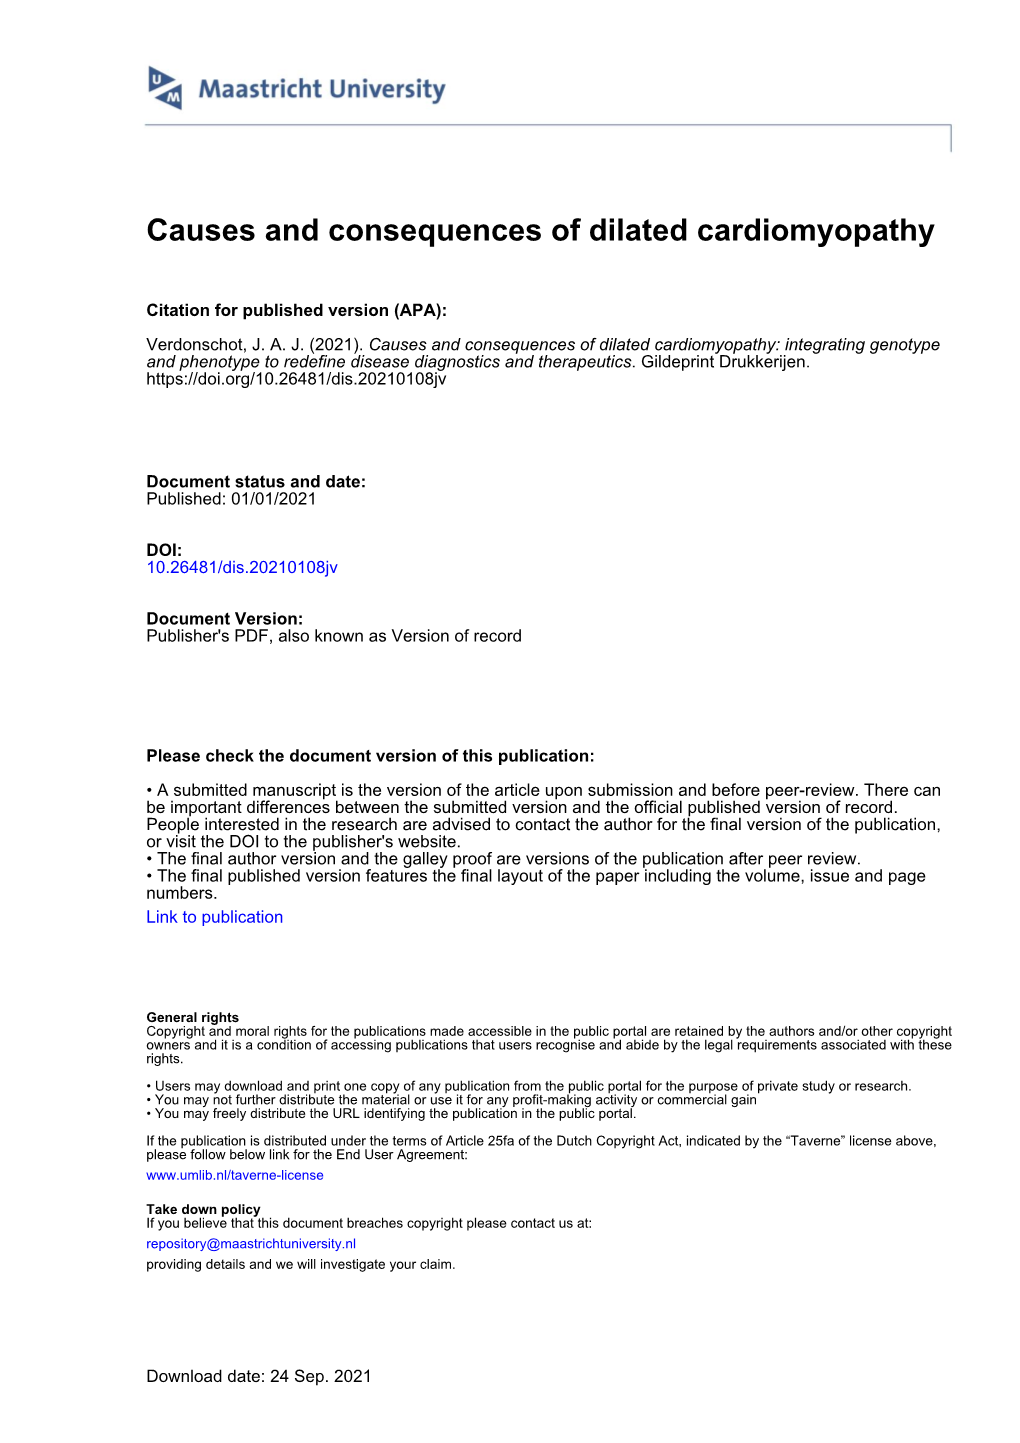 Causes and Consequences of Dilated Cardiomyopathy